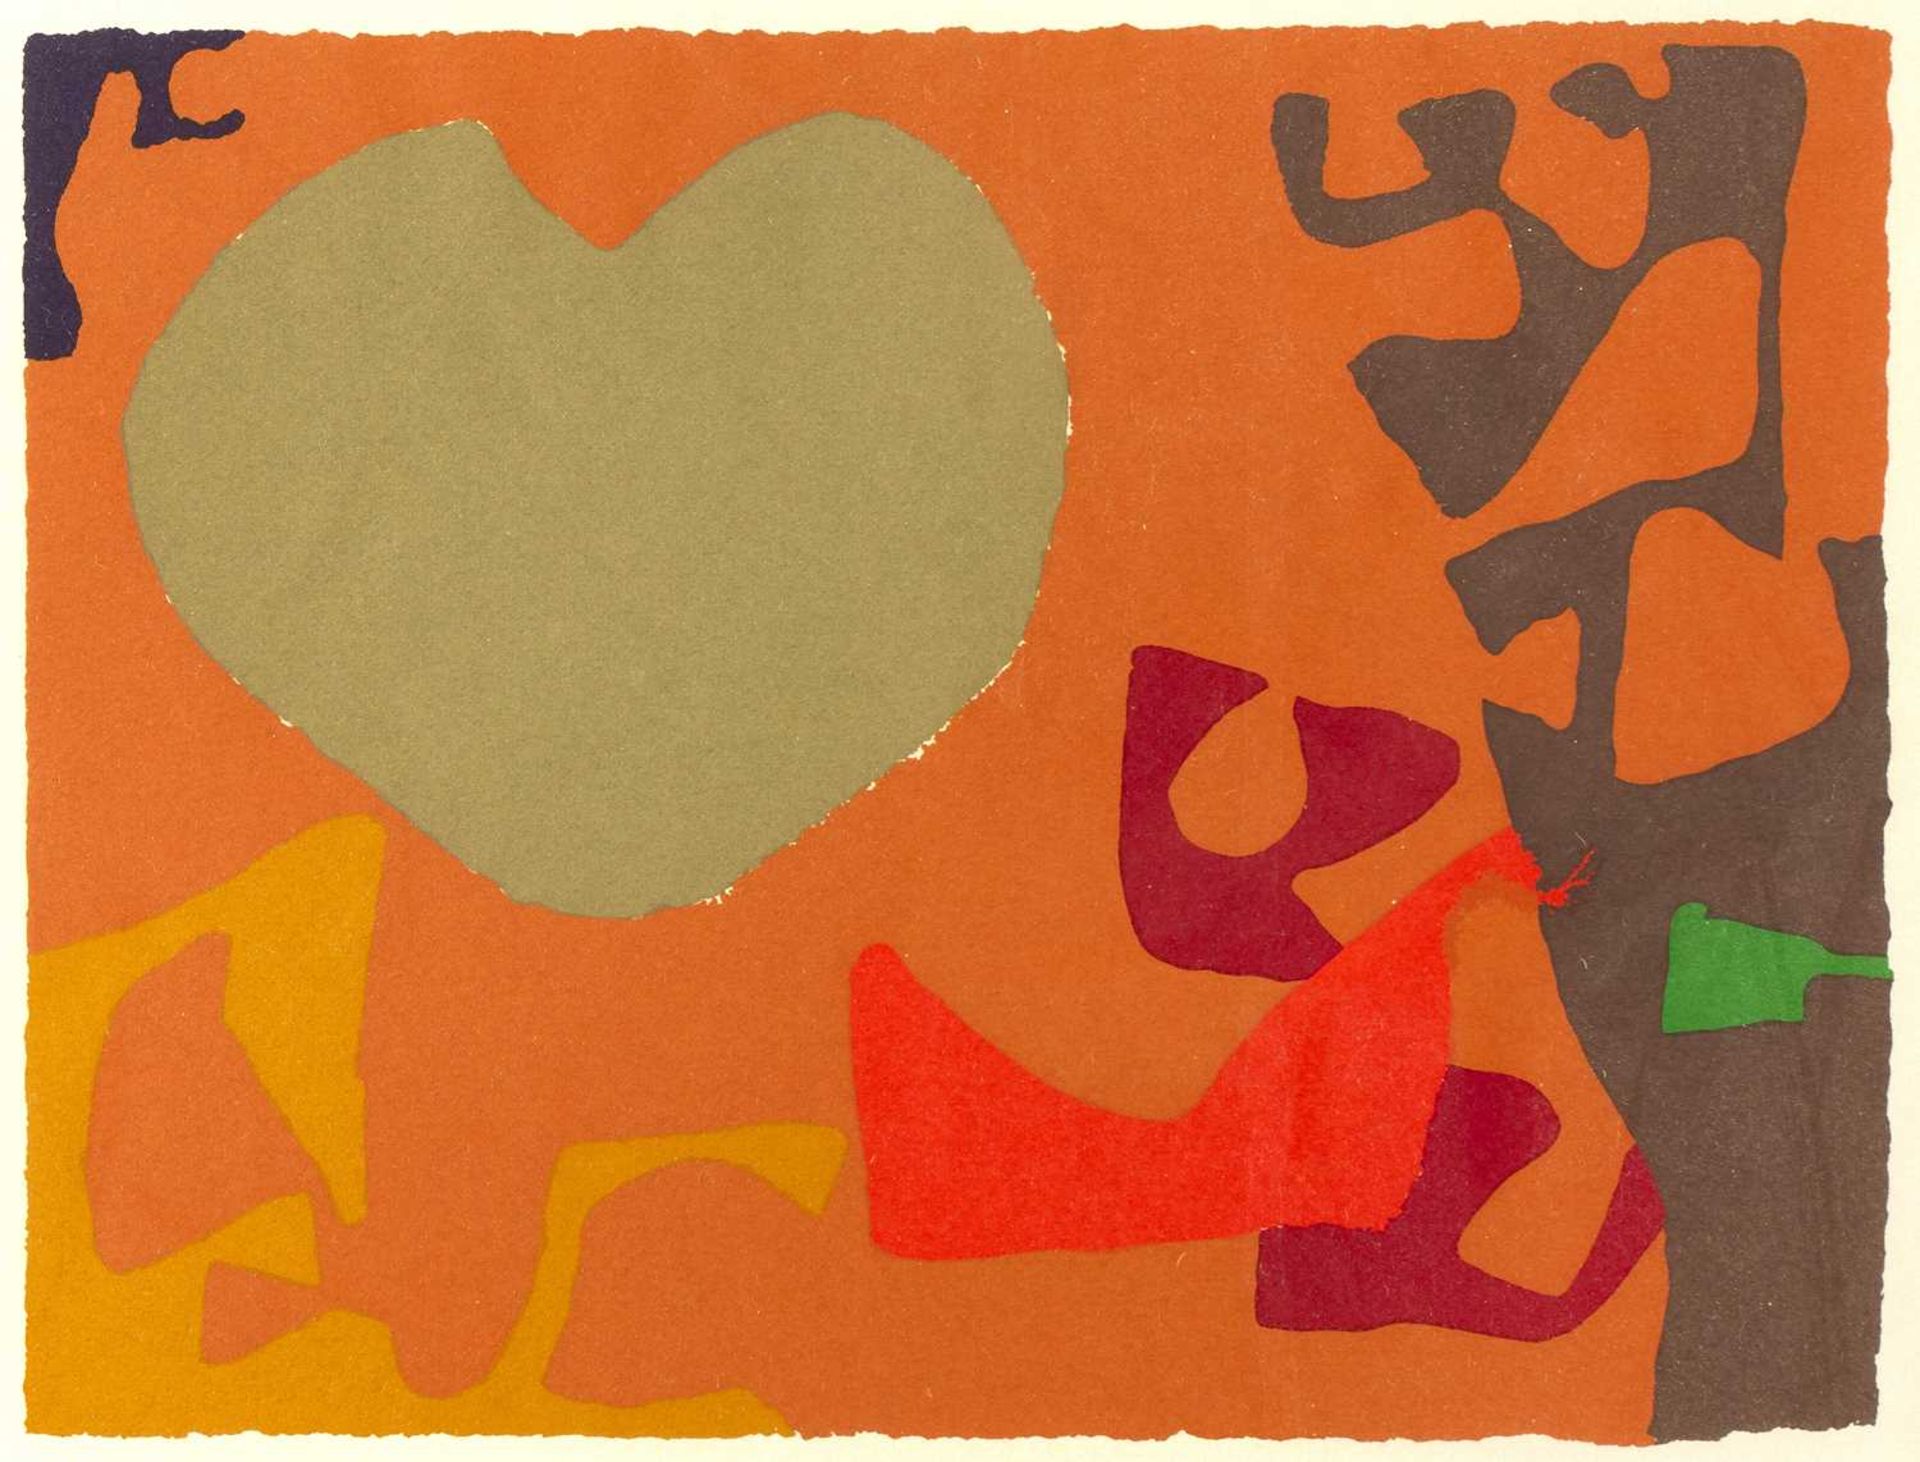 Patrick Heron (1920-1999) MINI JANUARY VIII : 1974 from THE SHAPES OF COLOUR : 1943-1978 signed in